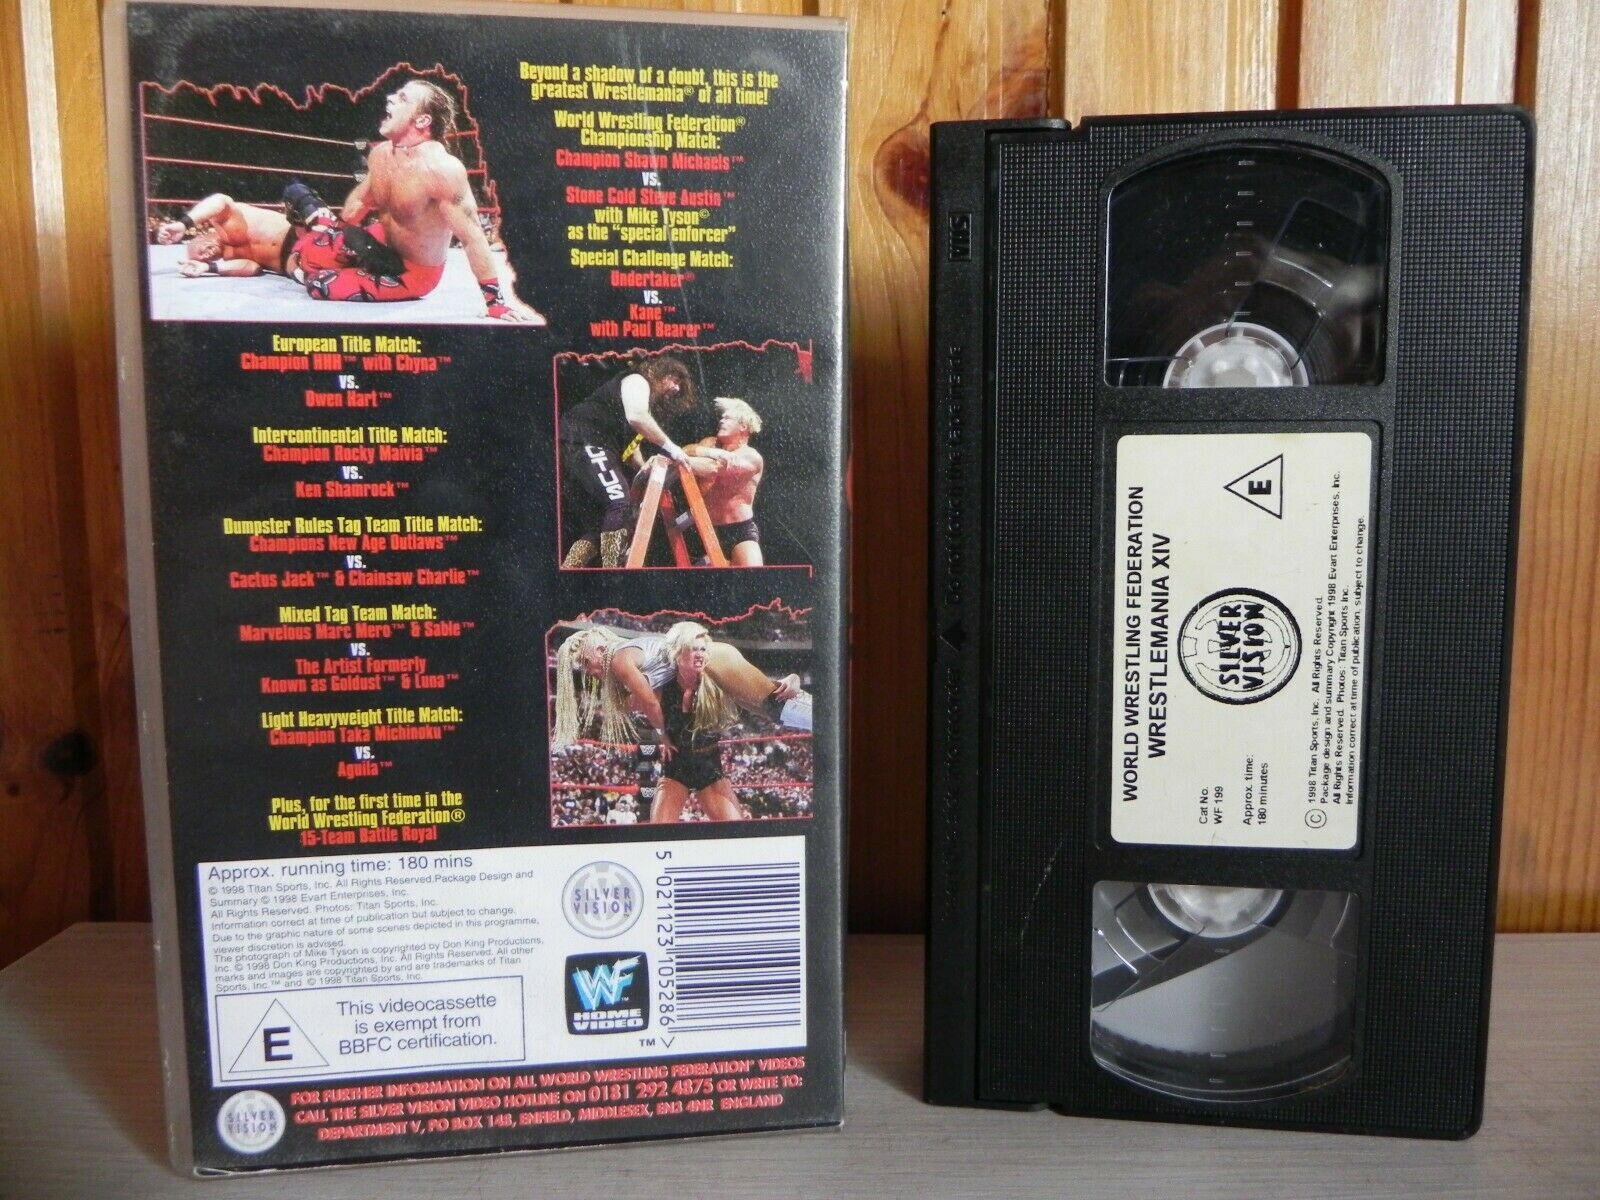 WrestleMania 14 - The Greatest Extravaganza Of All Time - Austin - Tyson - VHS-